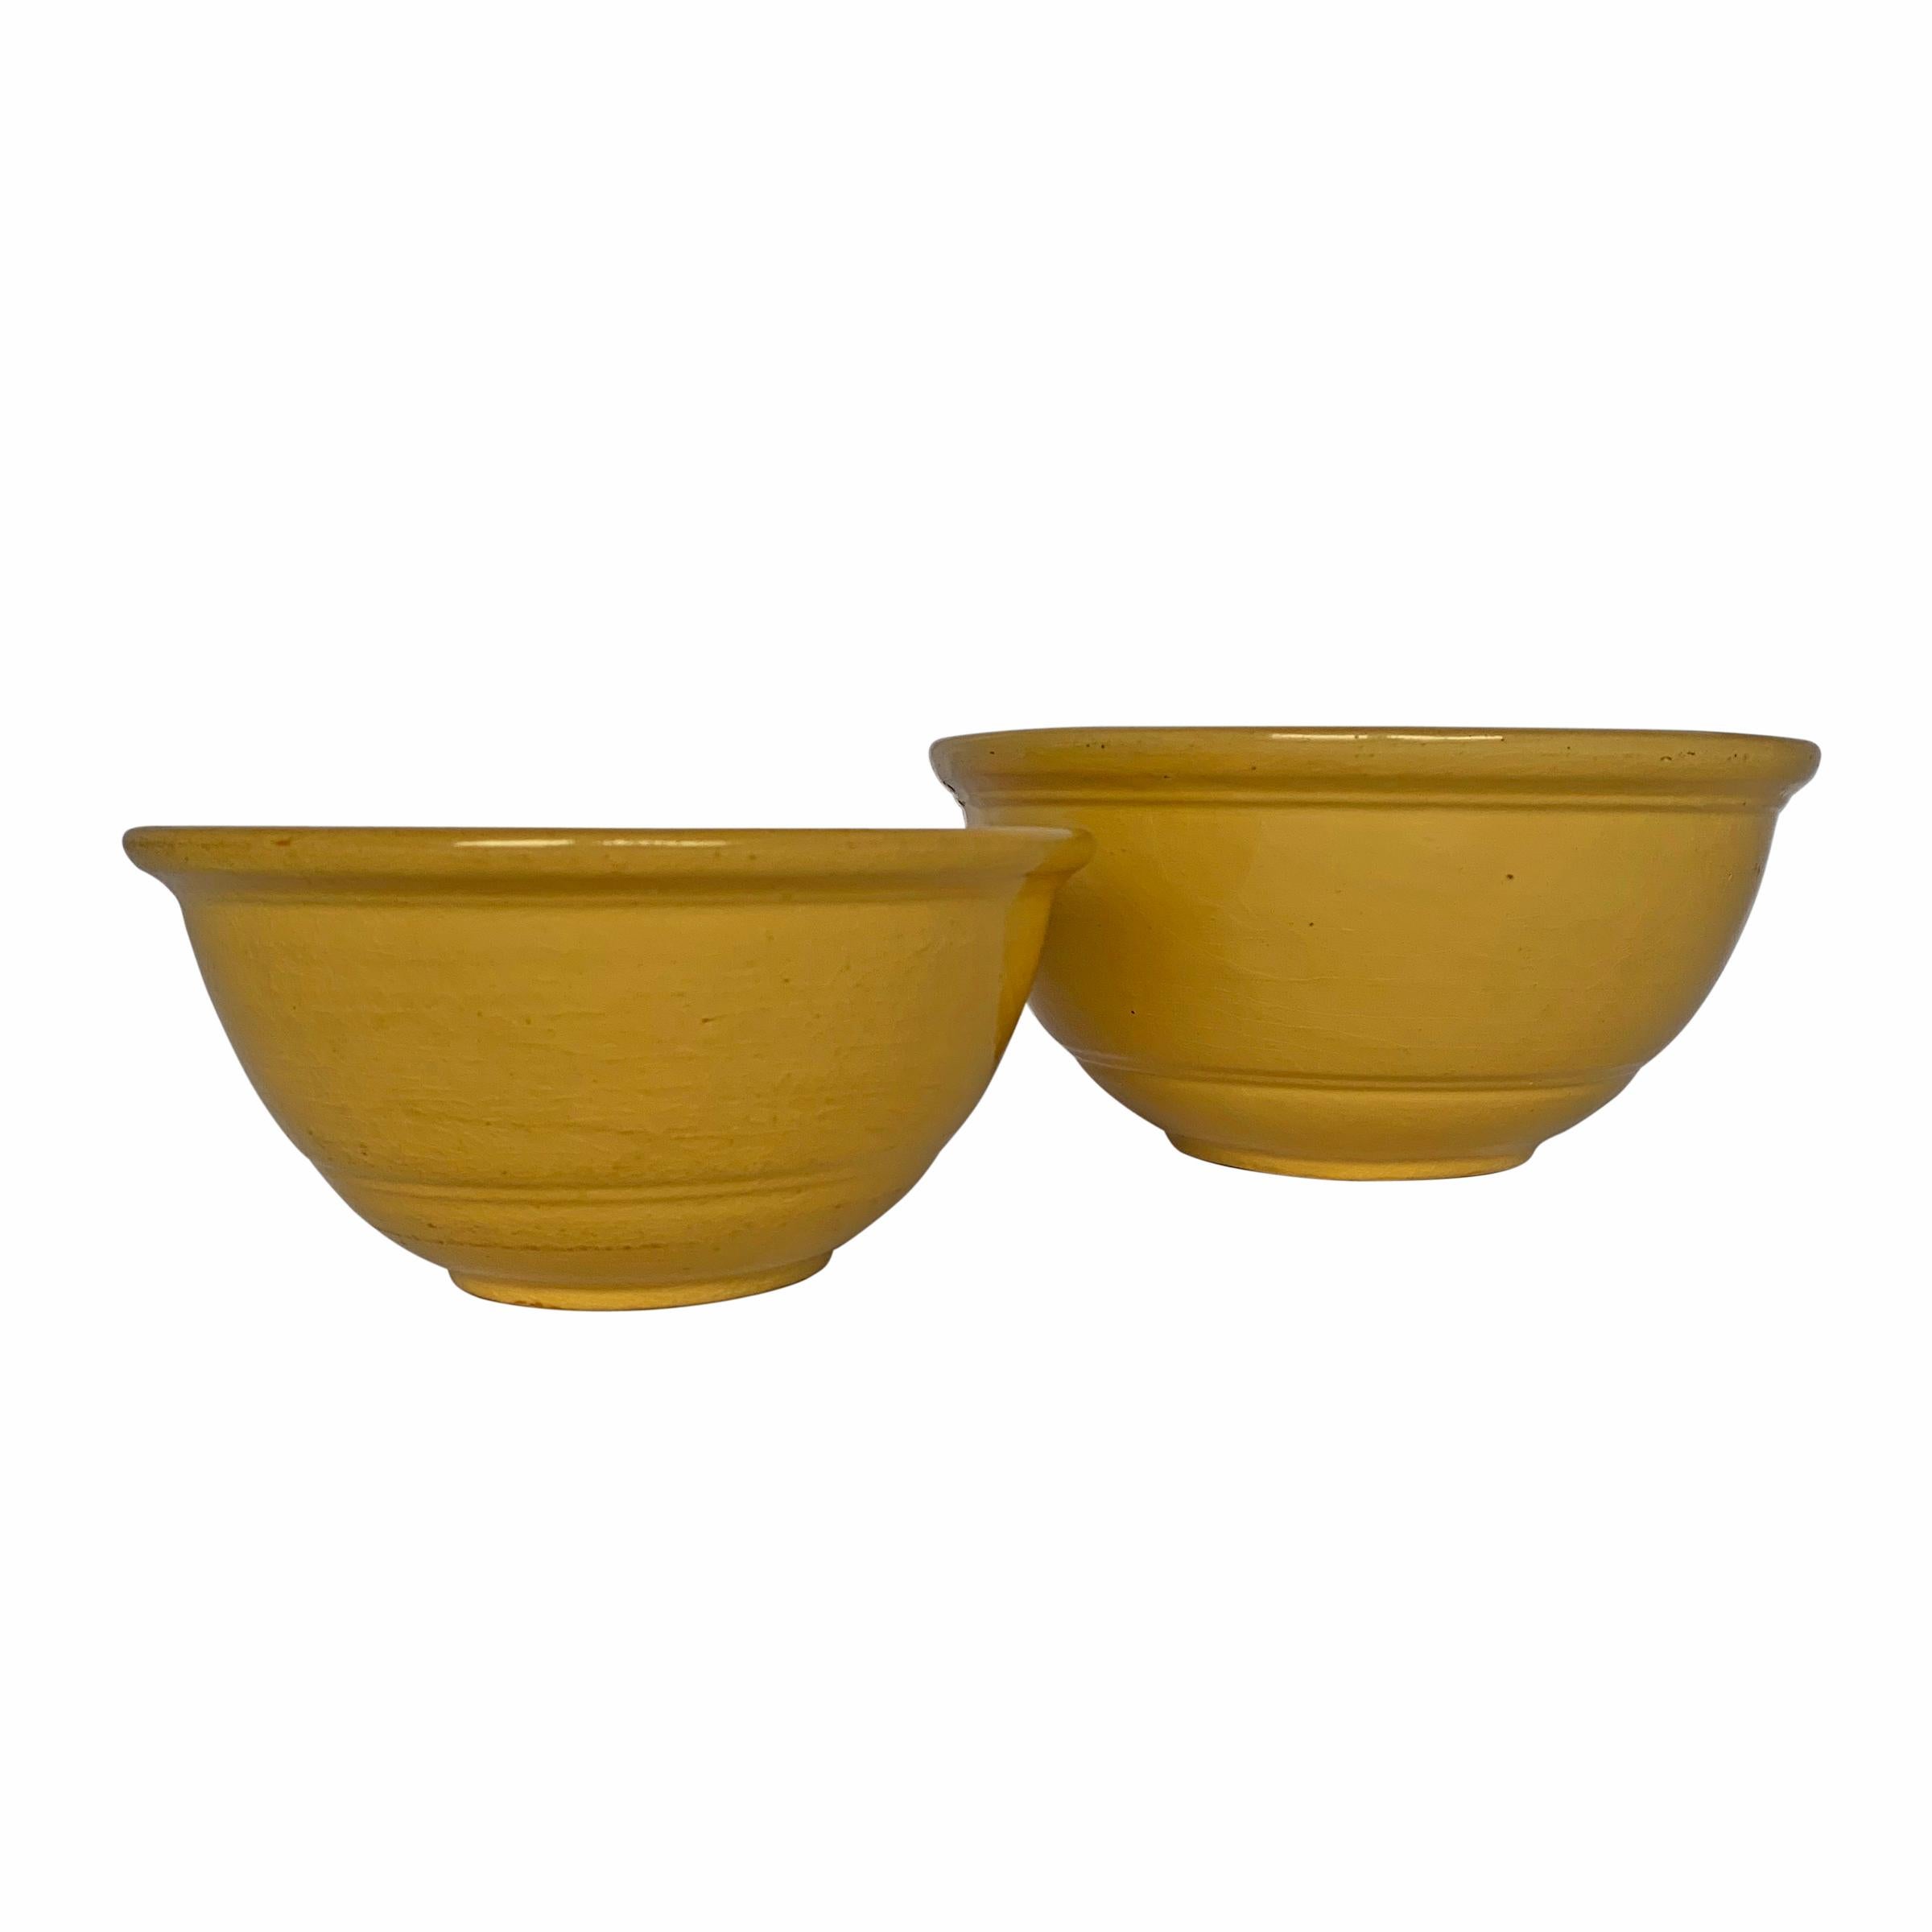 A set of two late 19th century American yellow ware mixing bowls of graduated sizes with simple incised lines at various points.

Measures: Small 8.25 in. diameter x 4 in. height.
Large 10.5 in. diameter x 4.75 in height.